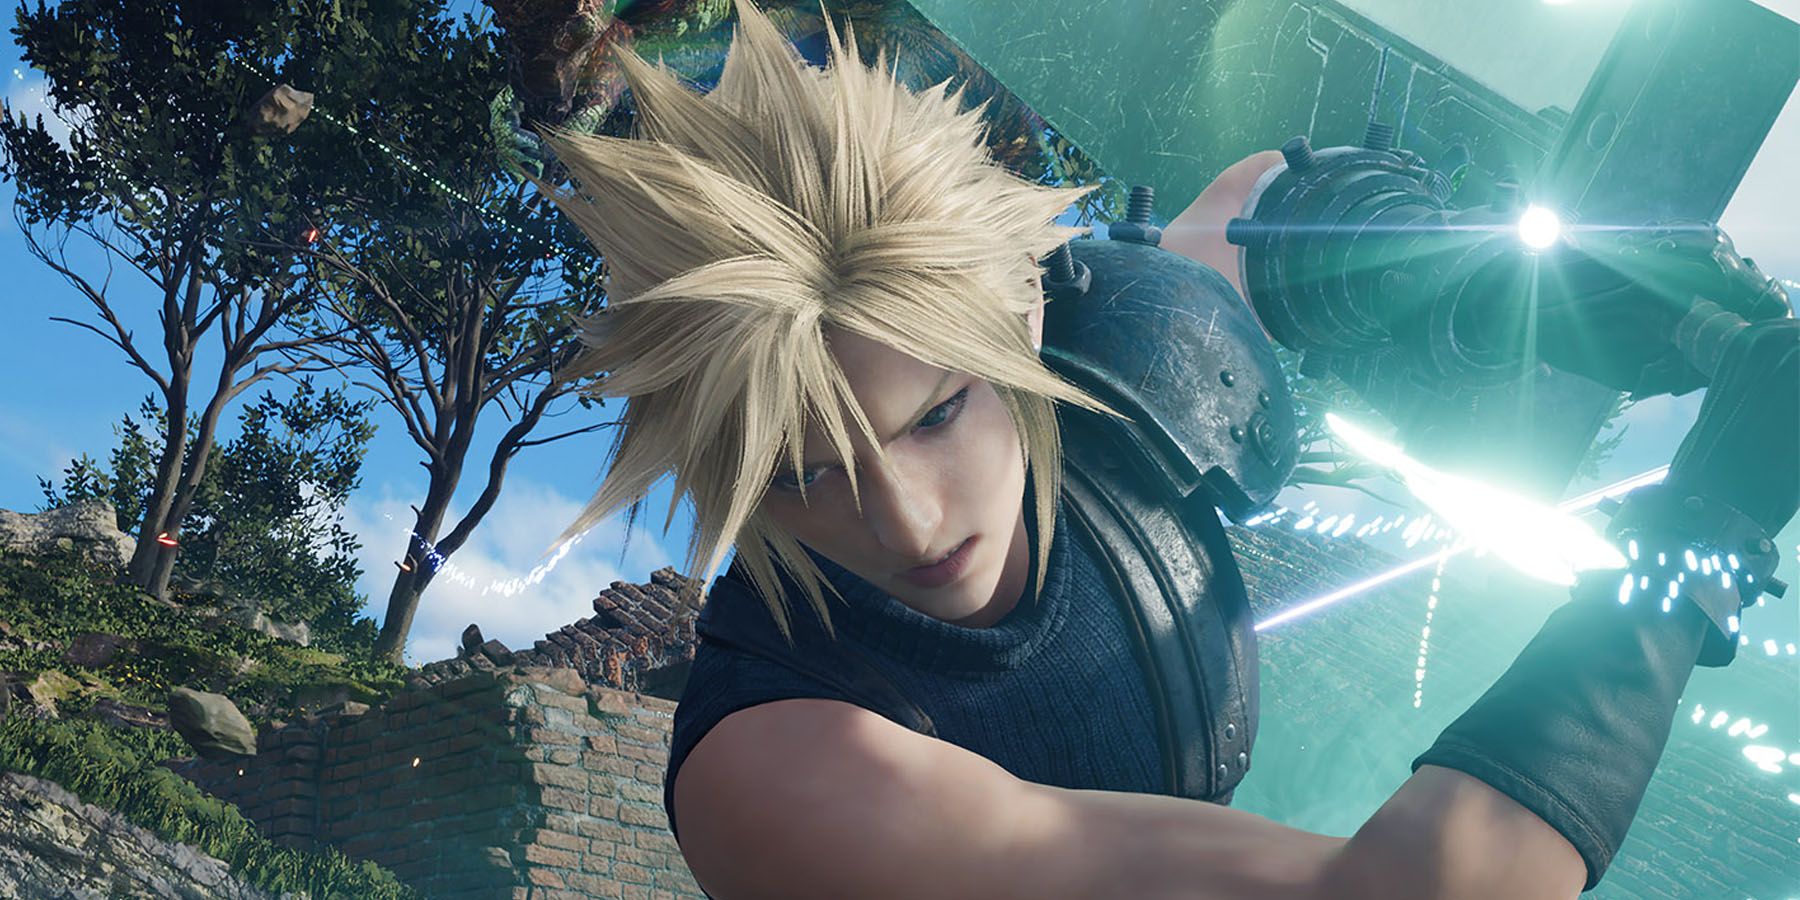 A screenshot of Cloud getting ready for an attack with his Buster Sword in Final Fantasy 7 Rebirth.